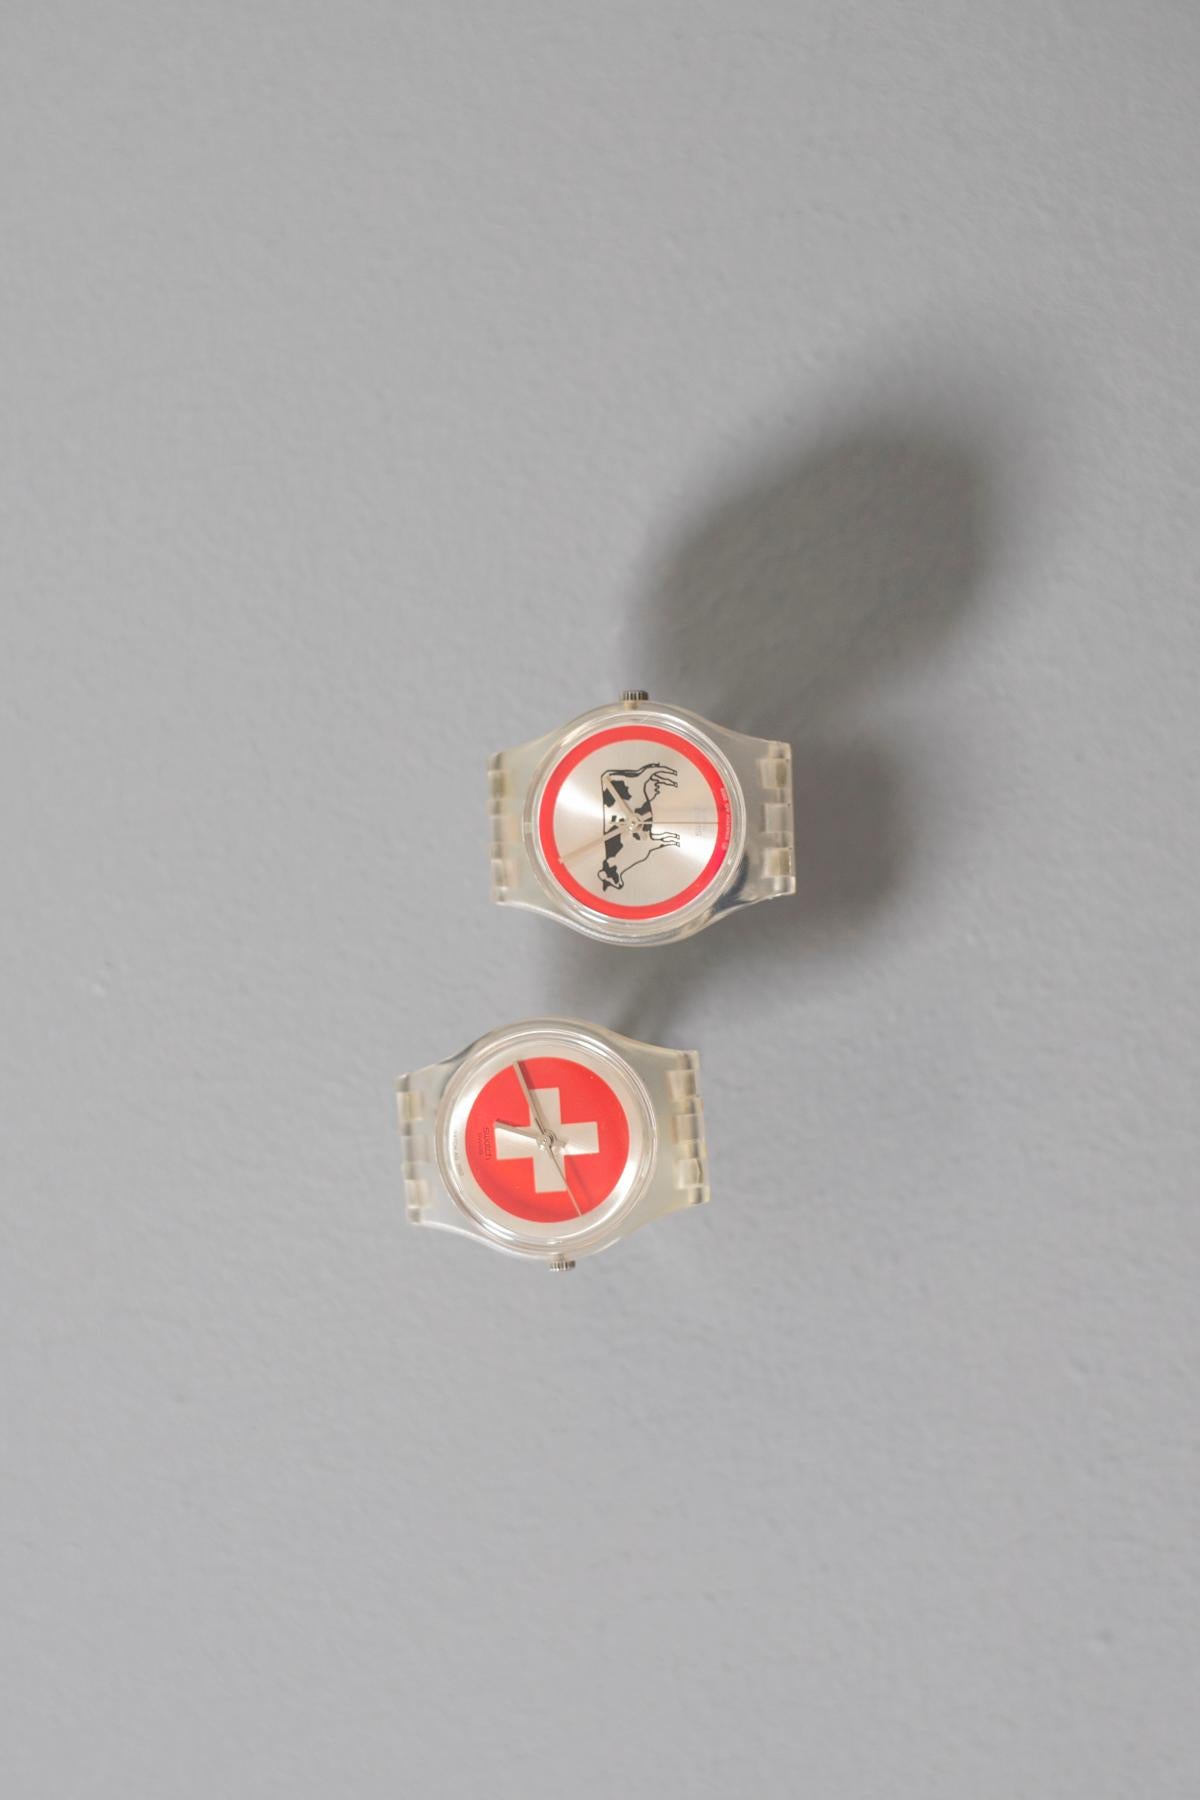 Rare original Swatch watch cufflinks, with serial number and case, from 2002. LIMITED EDITION.
The case is made of wood with matte glass, beautiful.
The cufflinks are in the shape of a watch, inside one is the Swiss flag, featuring a white cross on